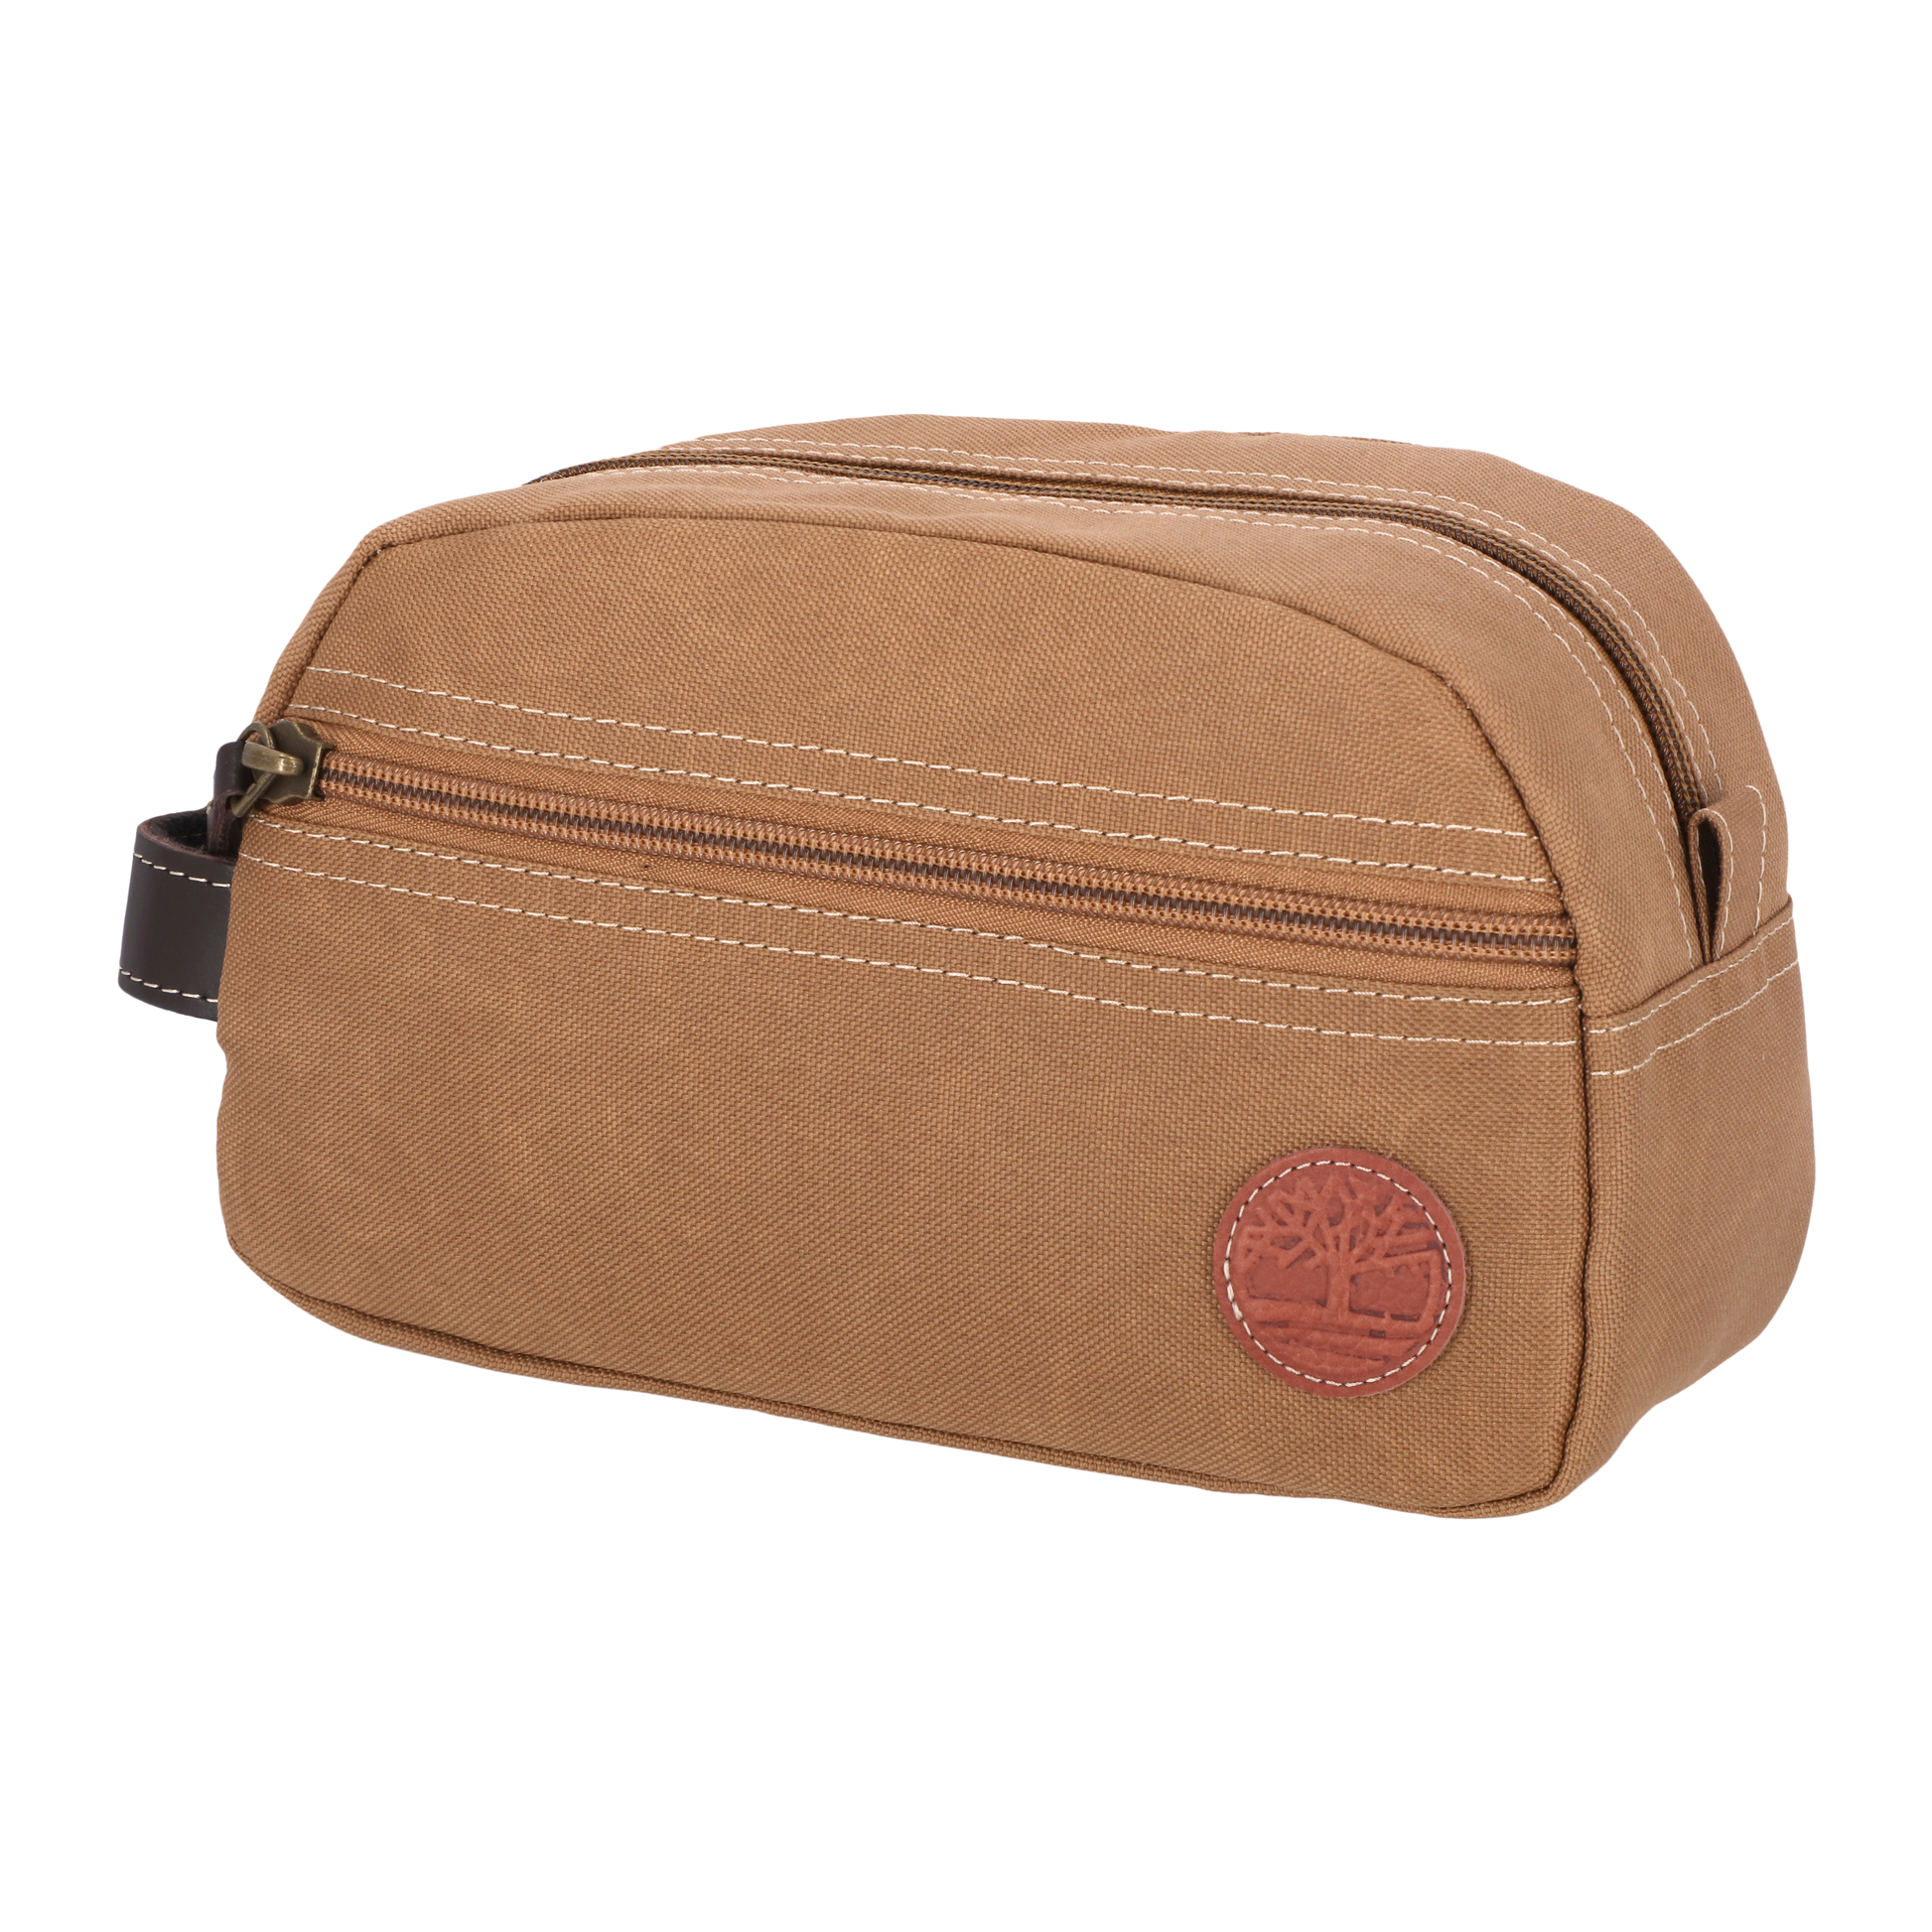 Khaki Timberland travel kit with side handle, zip top closure and exterior zipped front pocket